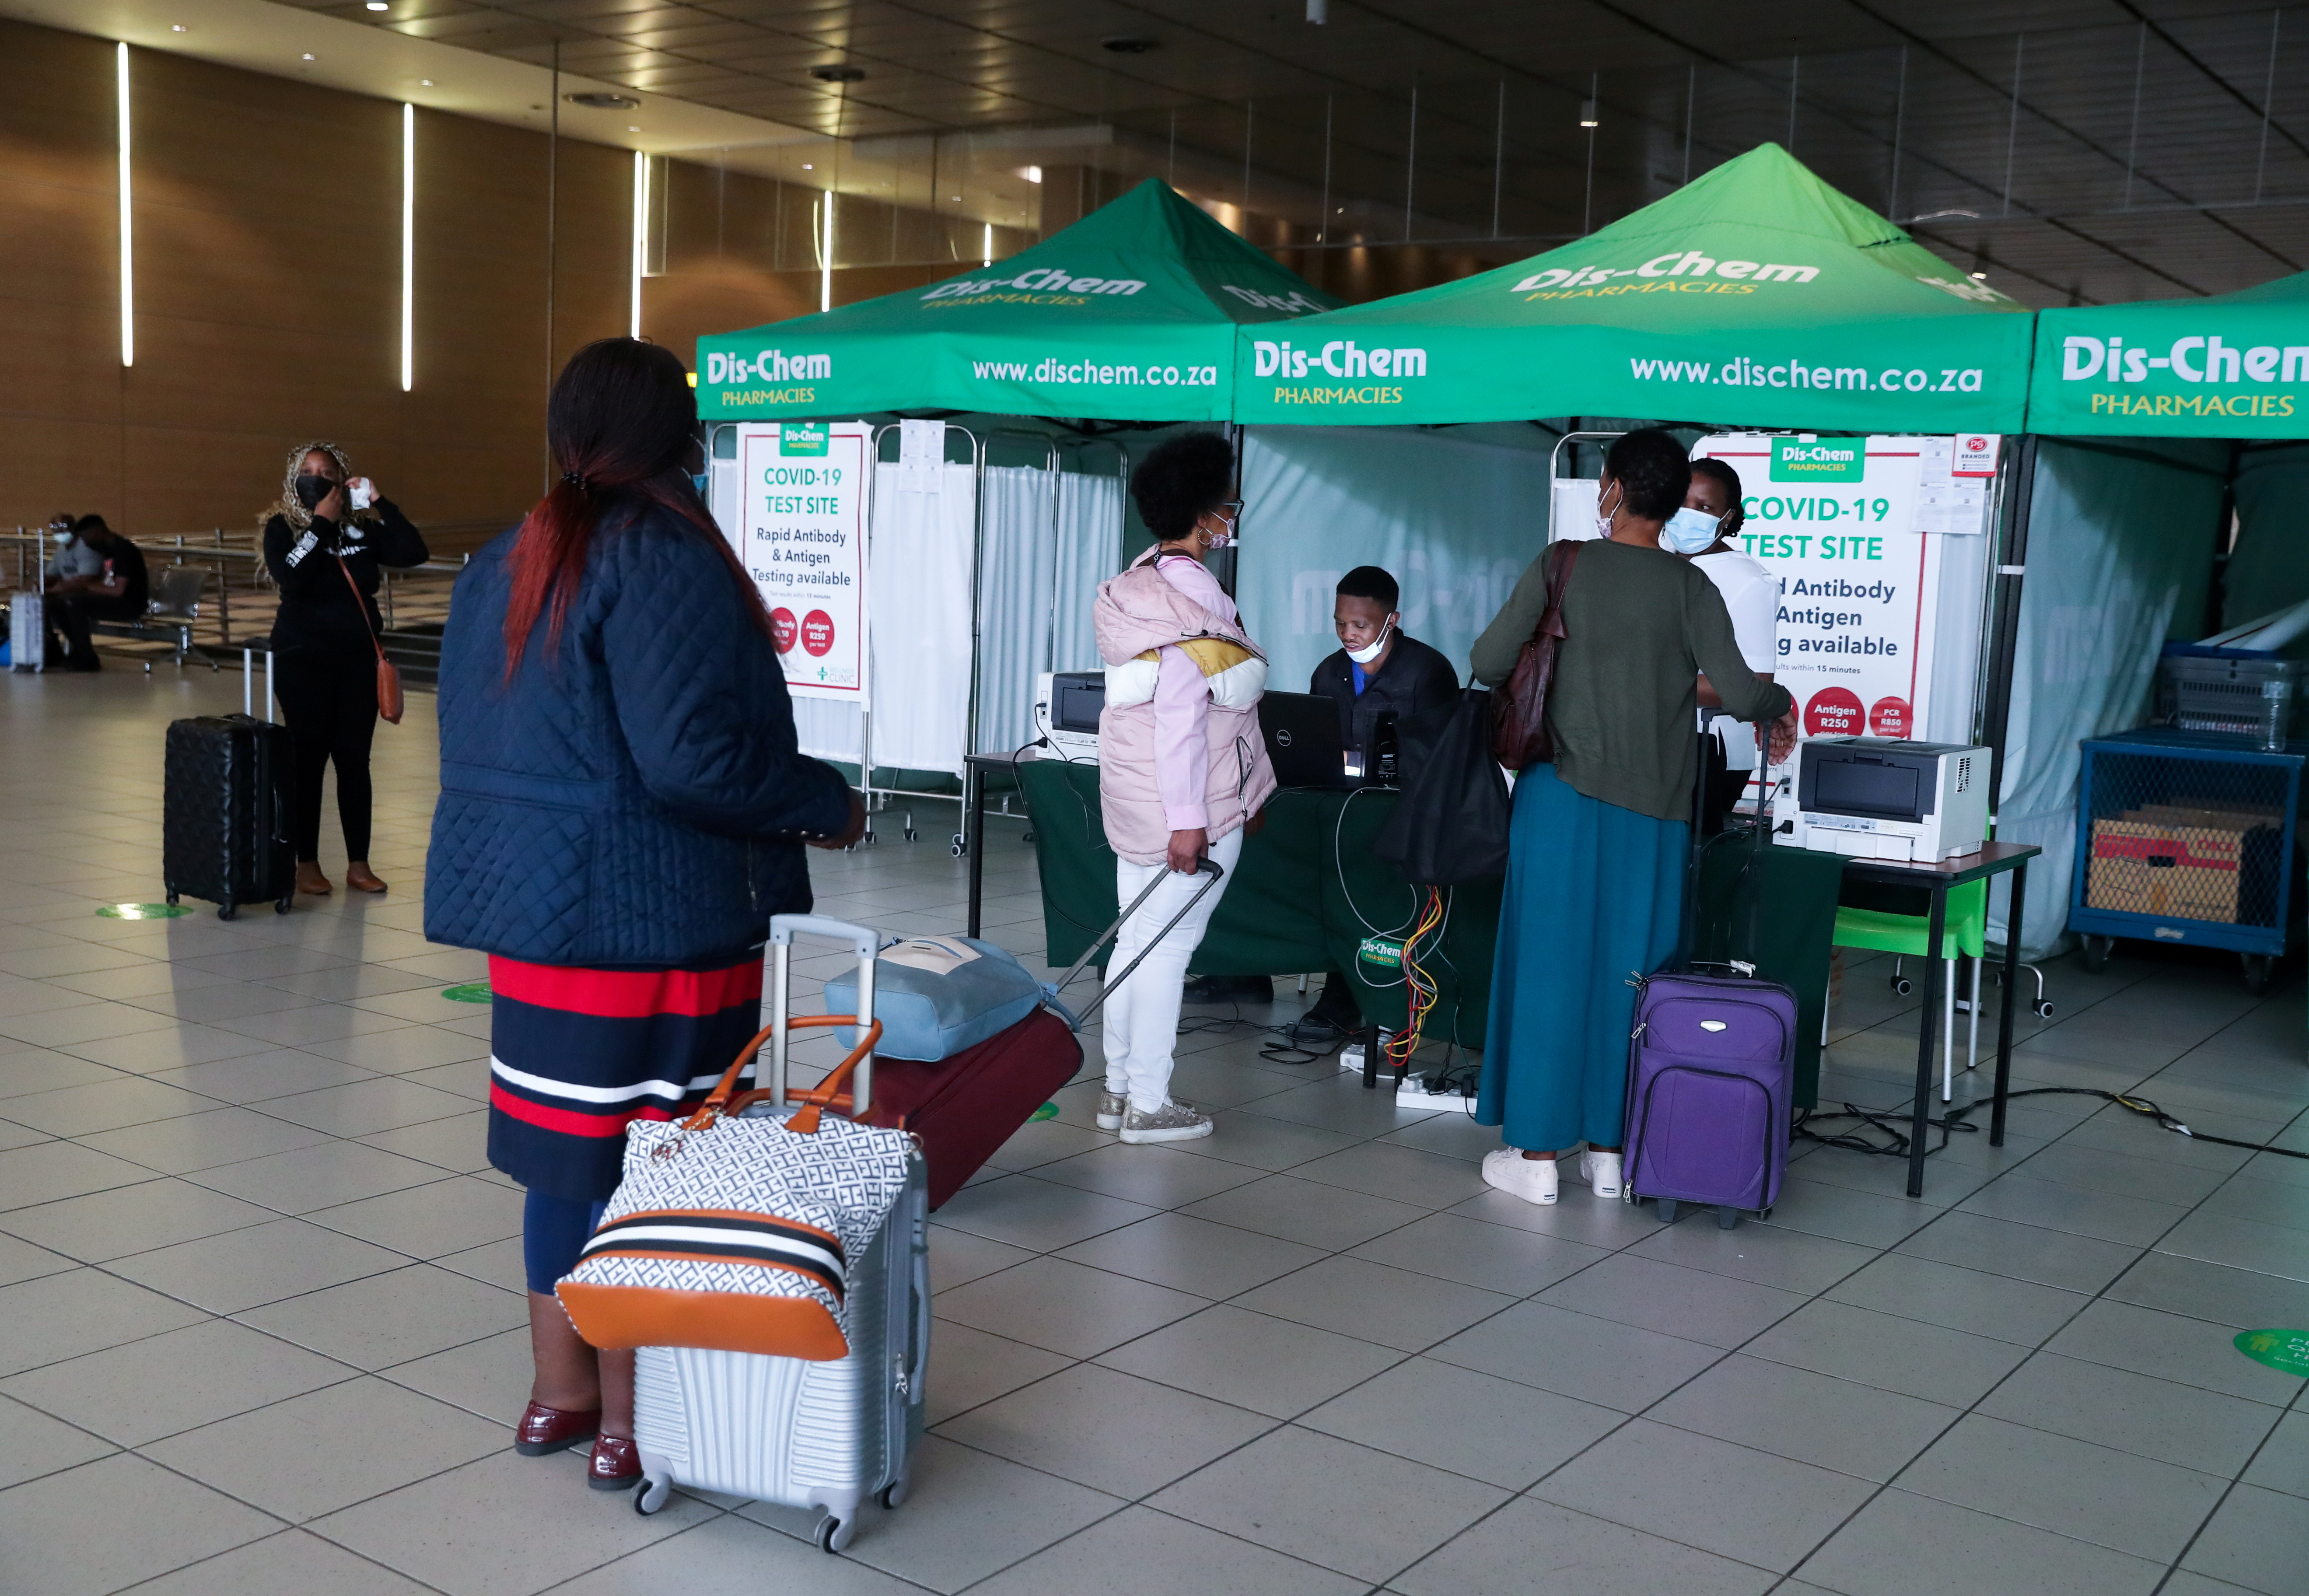 Passengers queue to get a PCR test against COVID-19 before traveling on international flights, at O.R. Tambo International Airport in Johannesburg